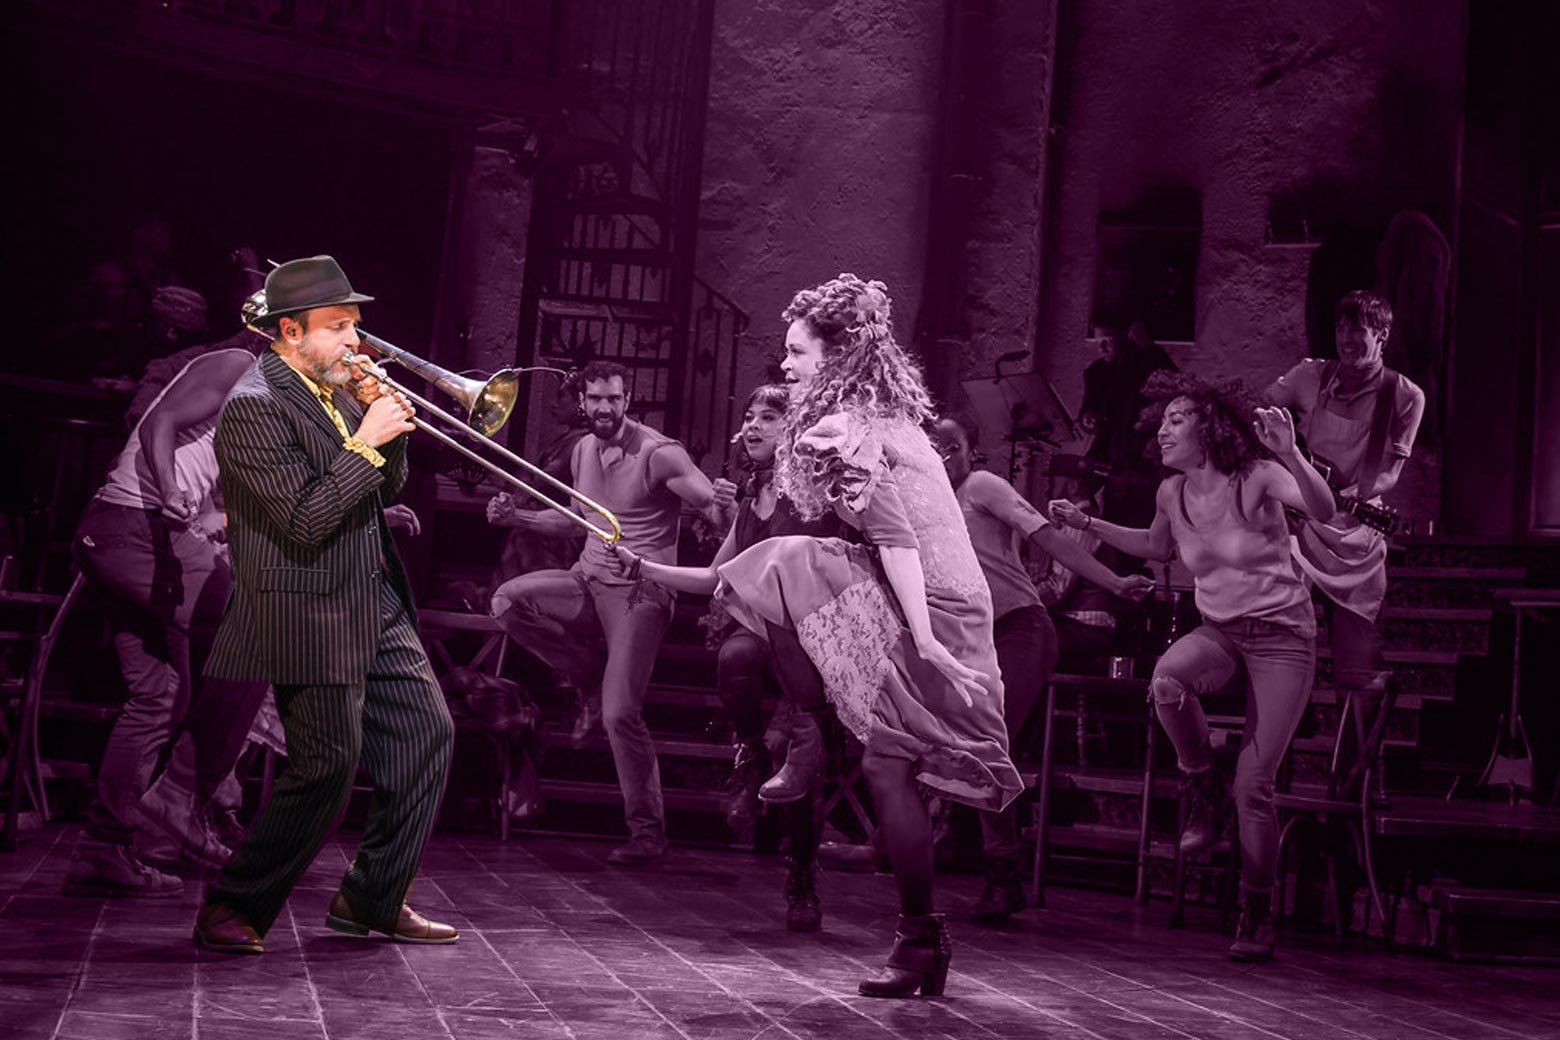 Brian Drye plays trombone with actors dancing around him onstage